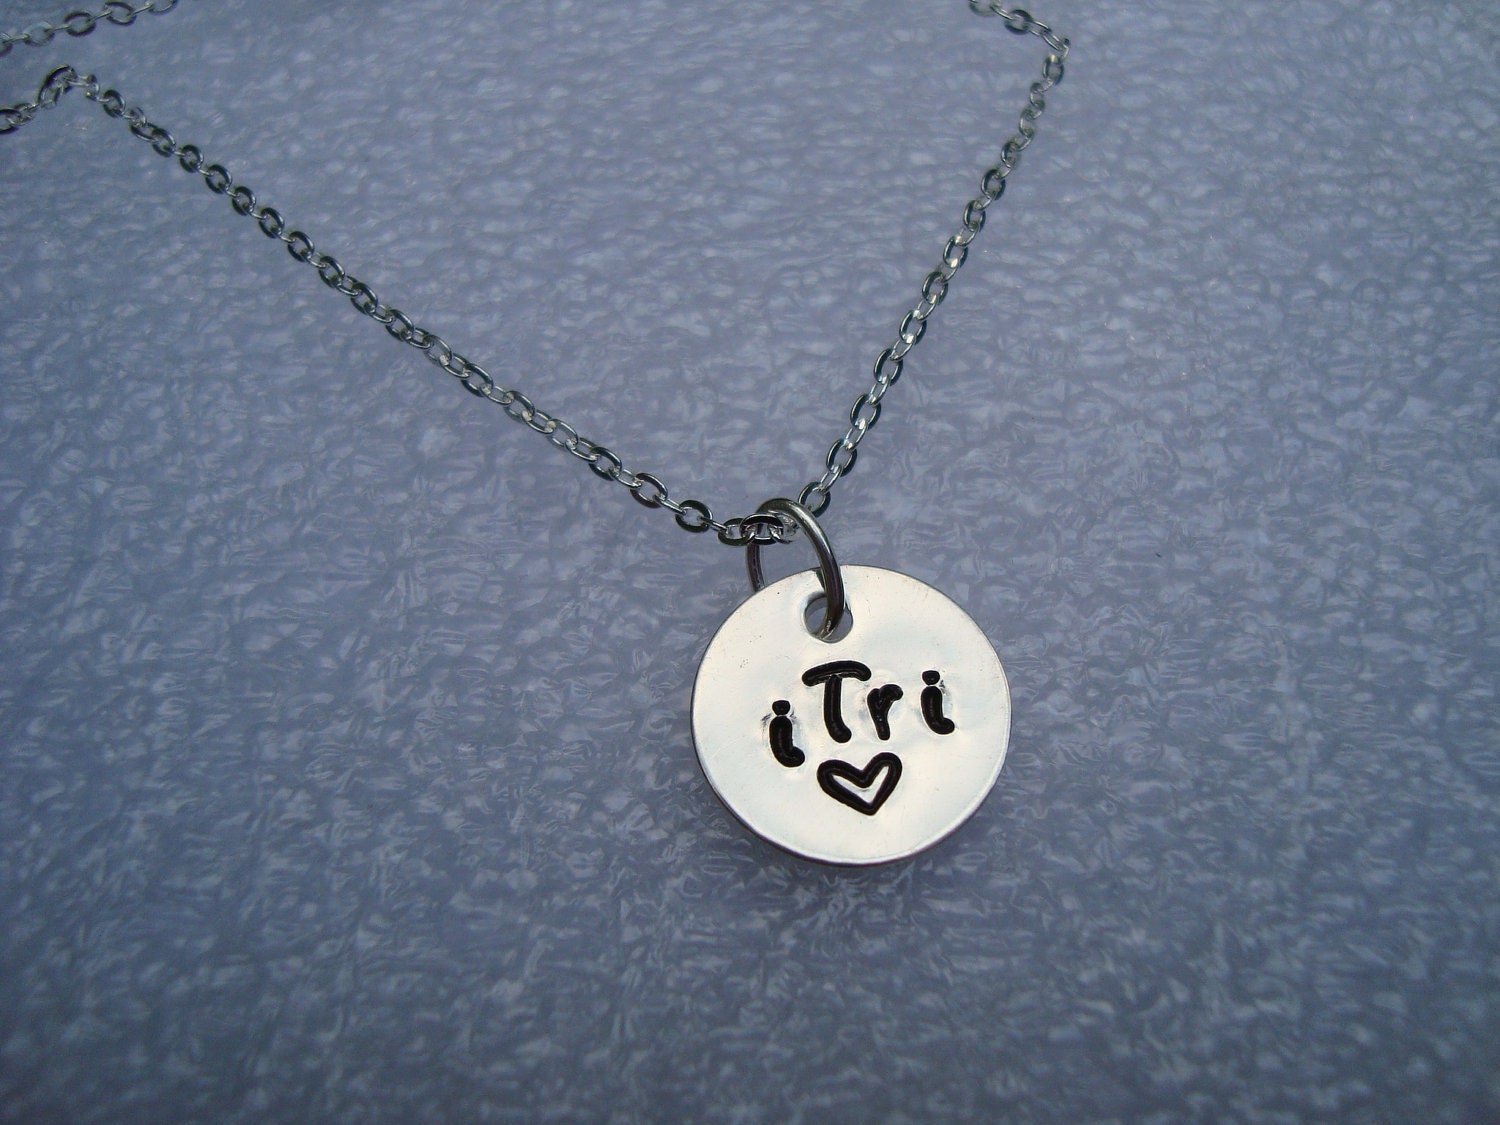 iTri Sterling Silver Necklace